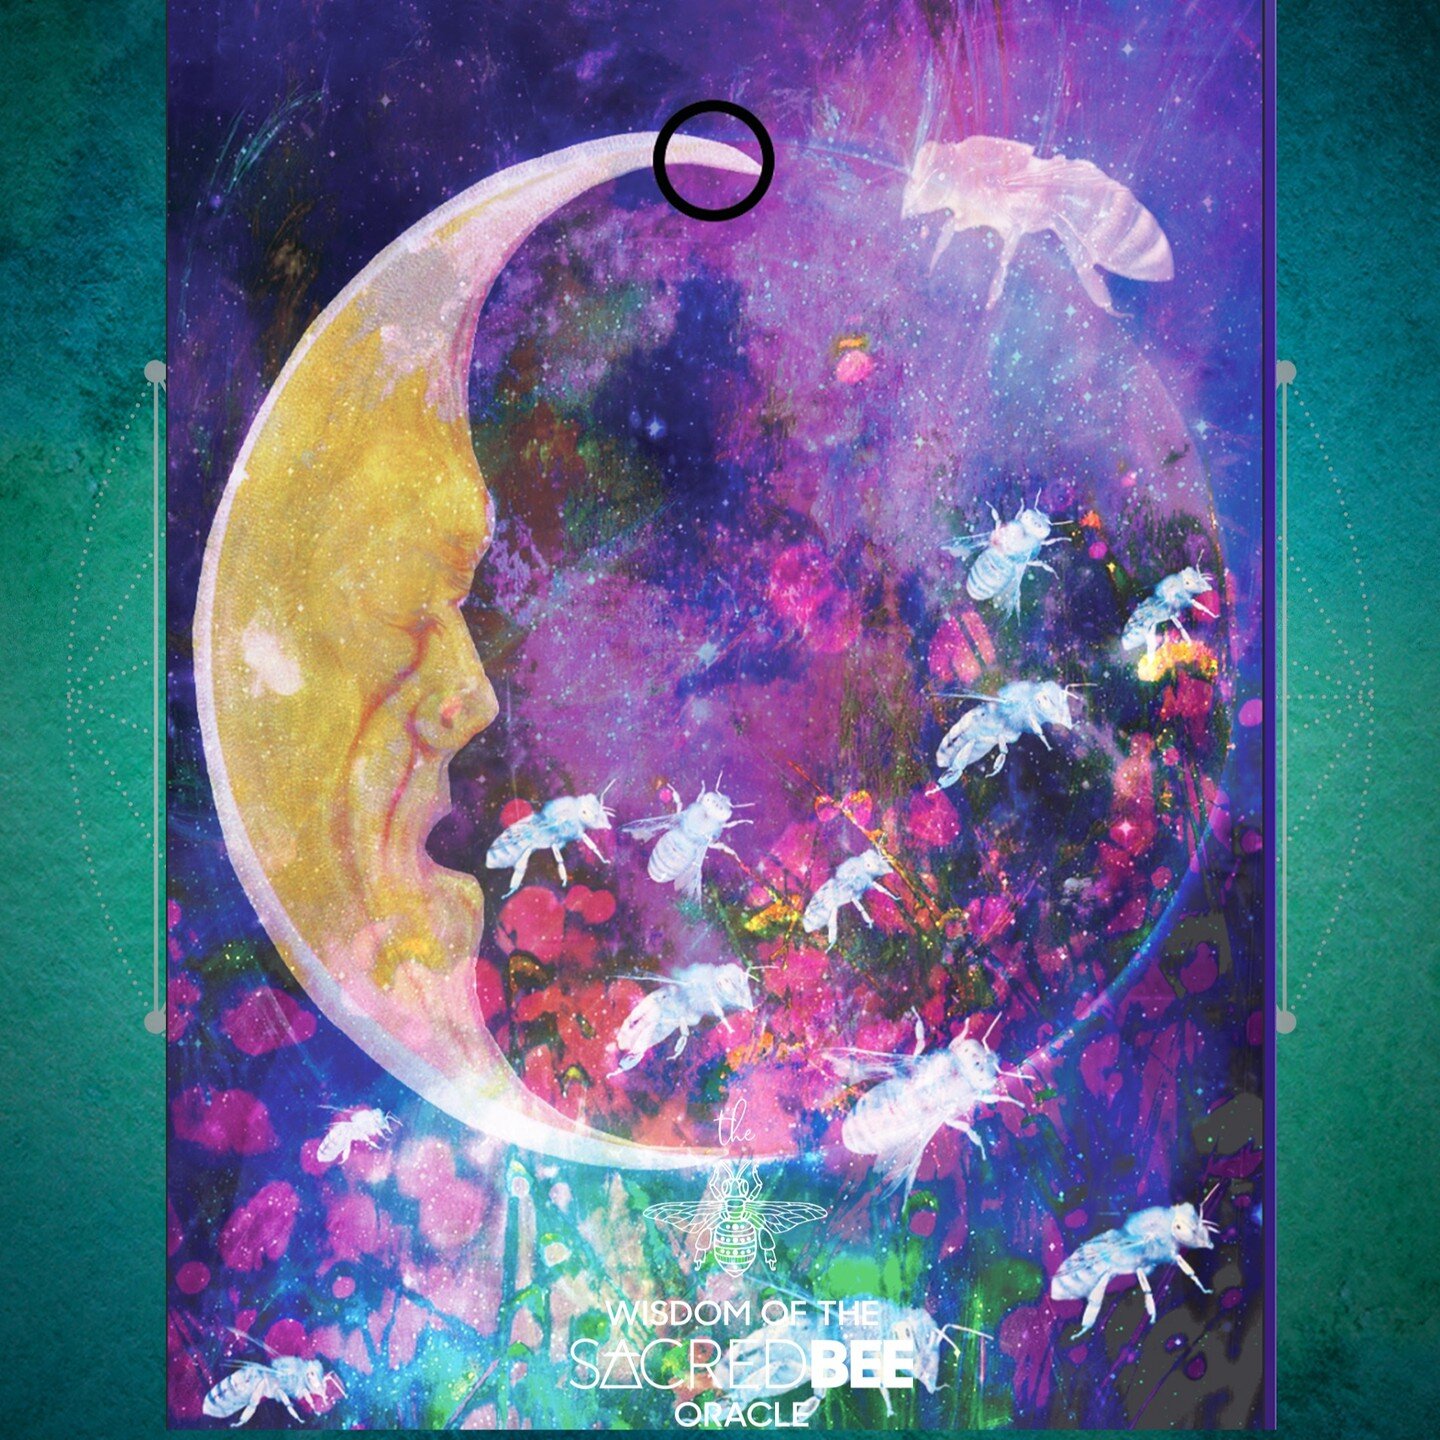 The Bee in the Moon

Wisdom in knowing that we don&rsquo;t have to know. We can just trust and let go.

The bees may know... They've been considered messengers between worlds in legends going back forever.

Deck: The Wisdom of The Sacred Bee Oracle

